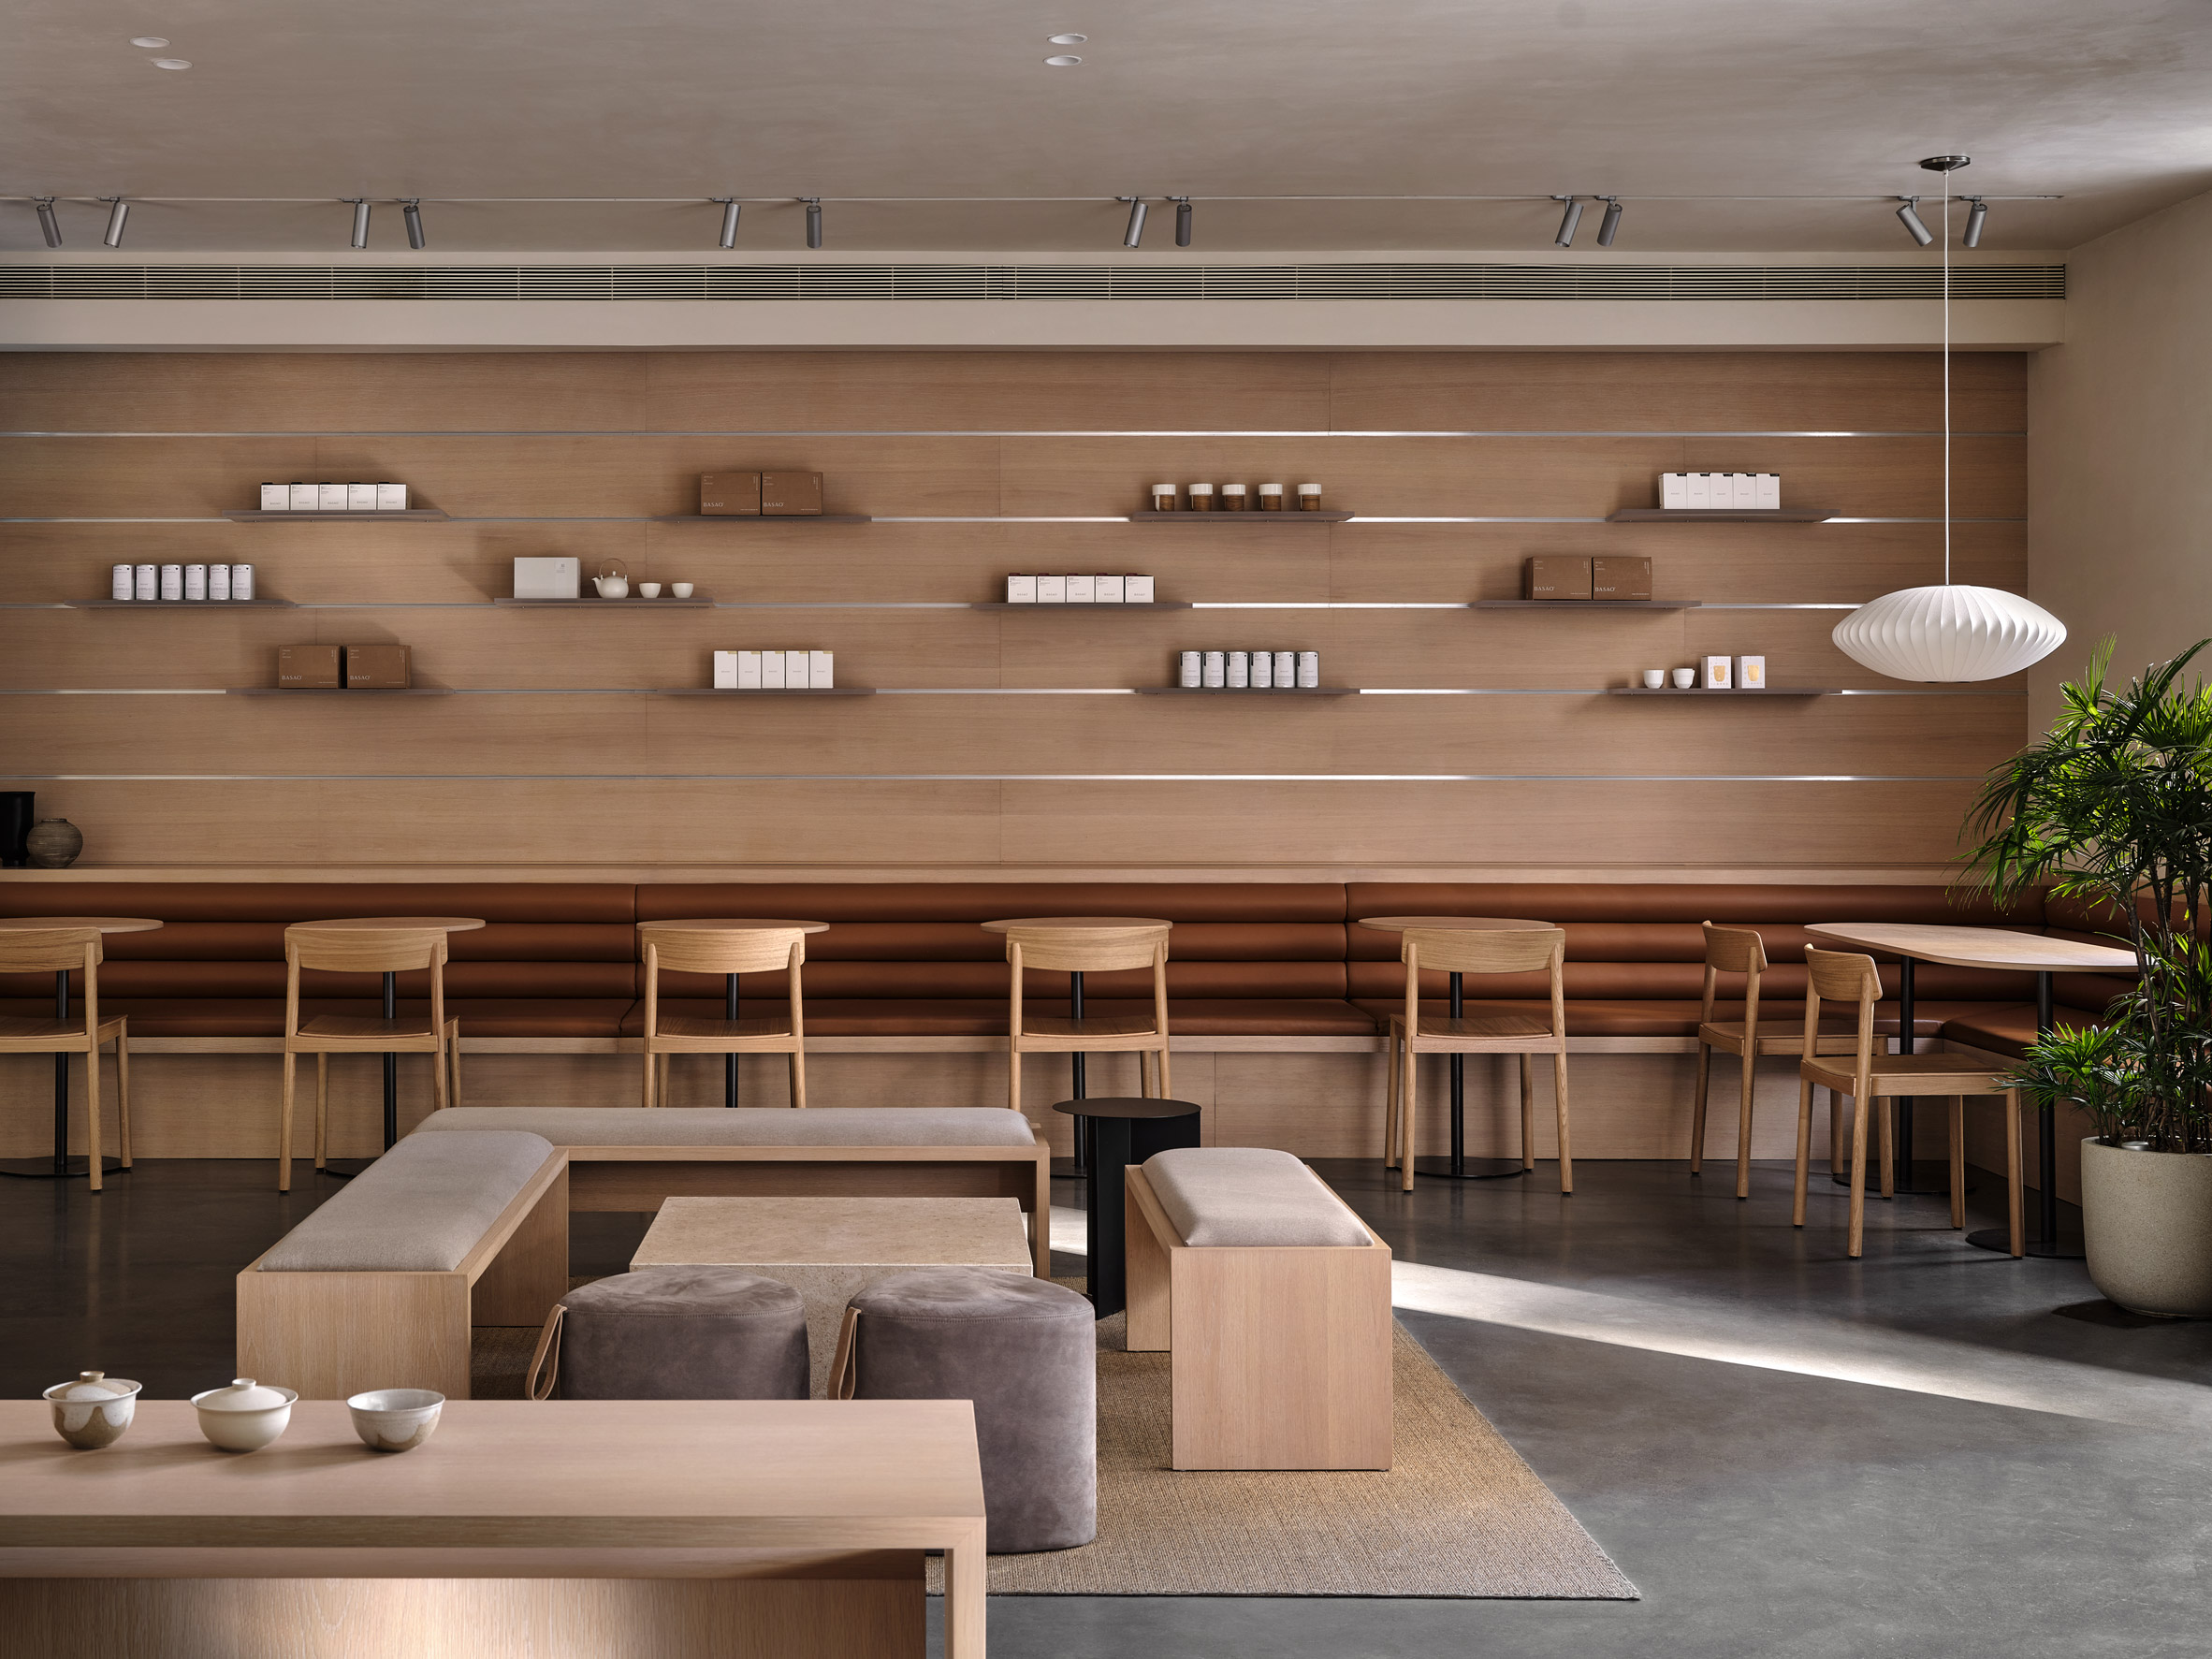 Leather-upholstered banquette next to suede covered benches and poufs in Xiamen teahouse designed by Norm Architects